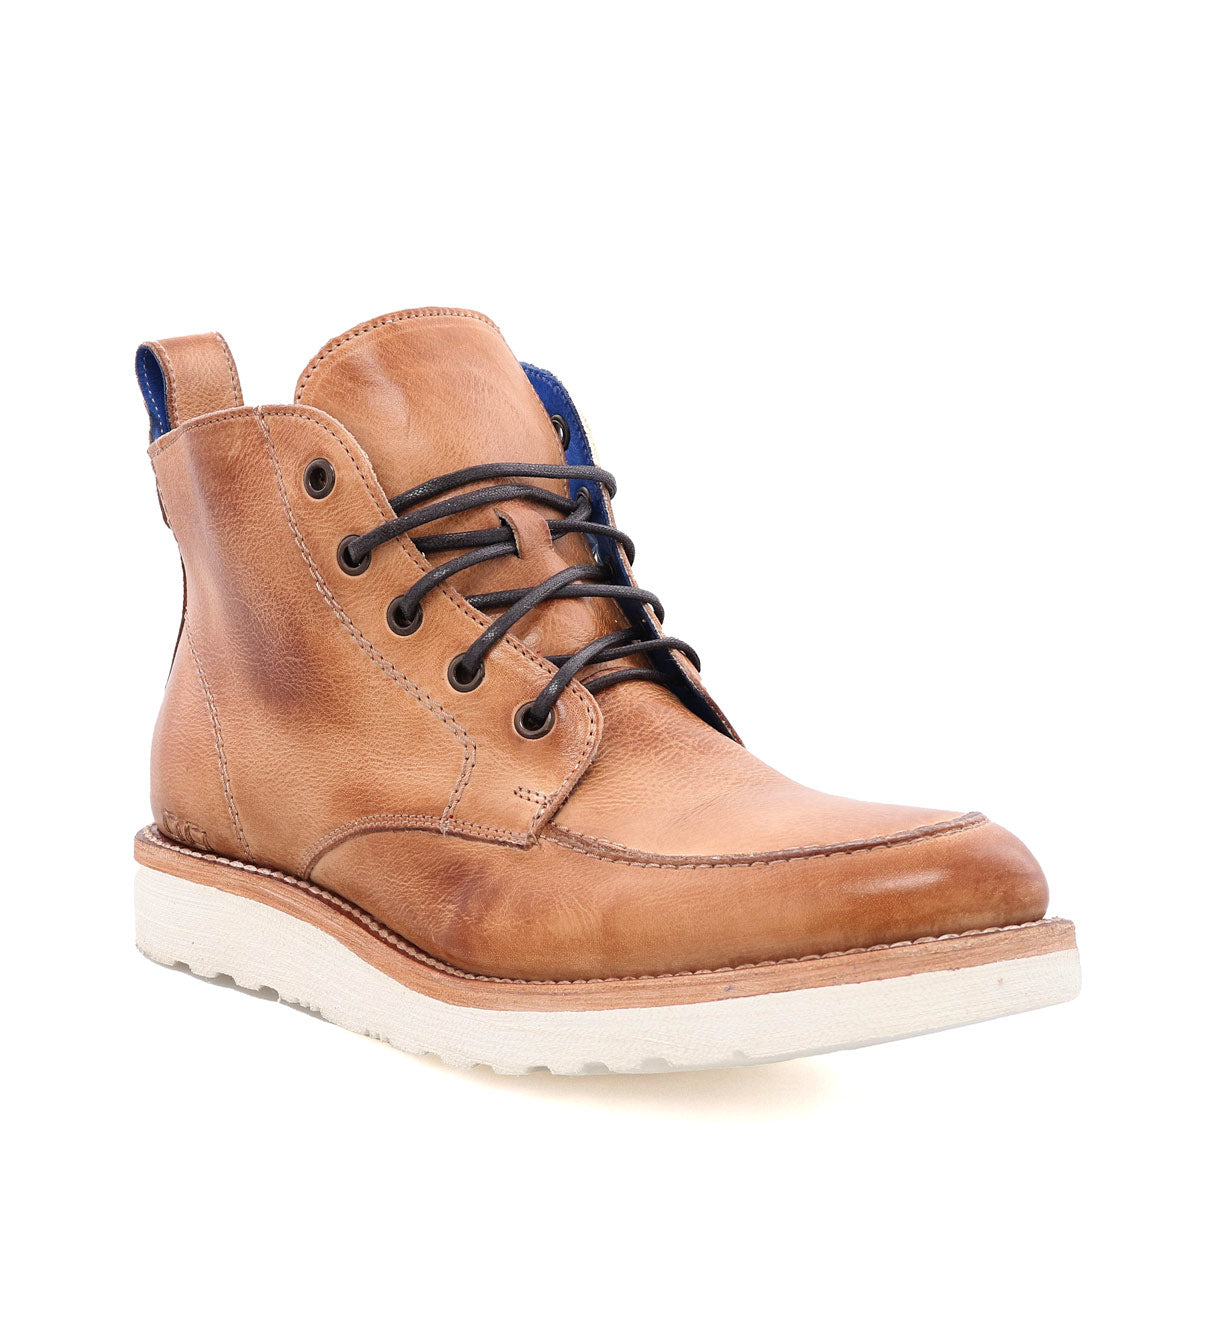 A men's Lincoln leather boot with laces and a white sole by Bed Stu.